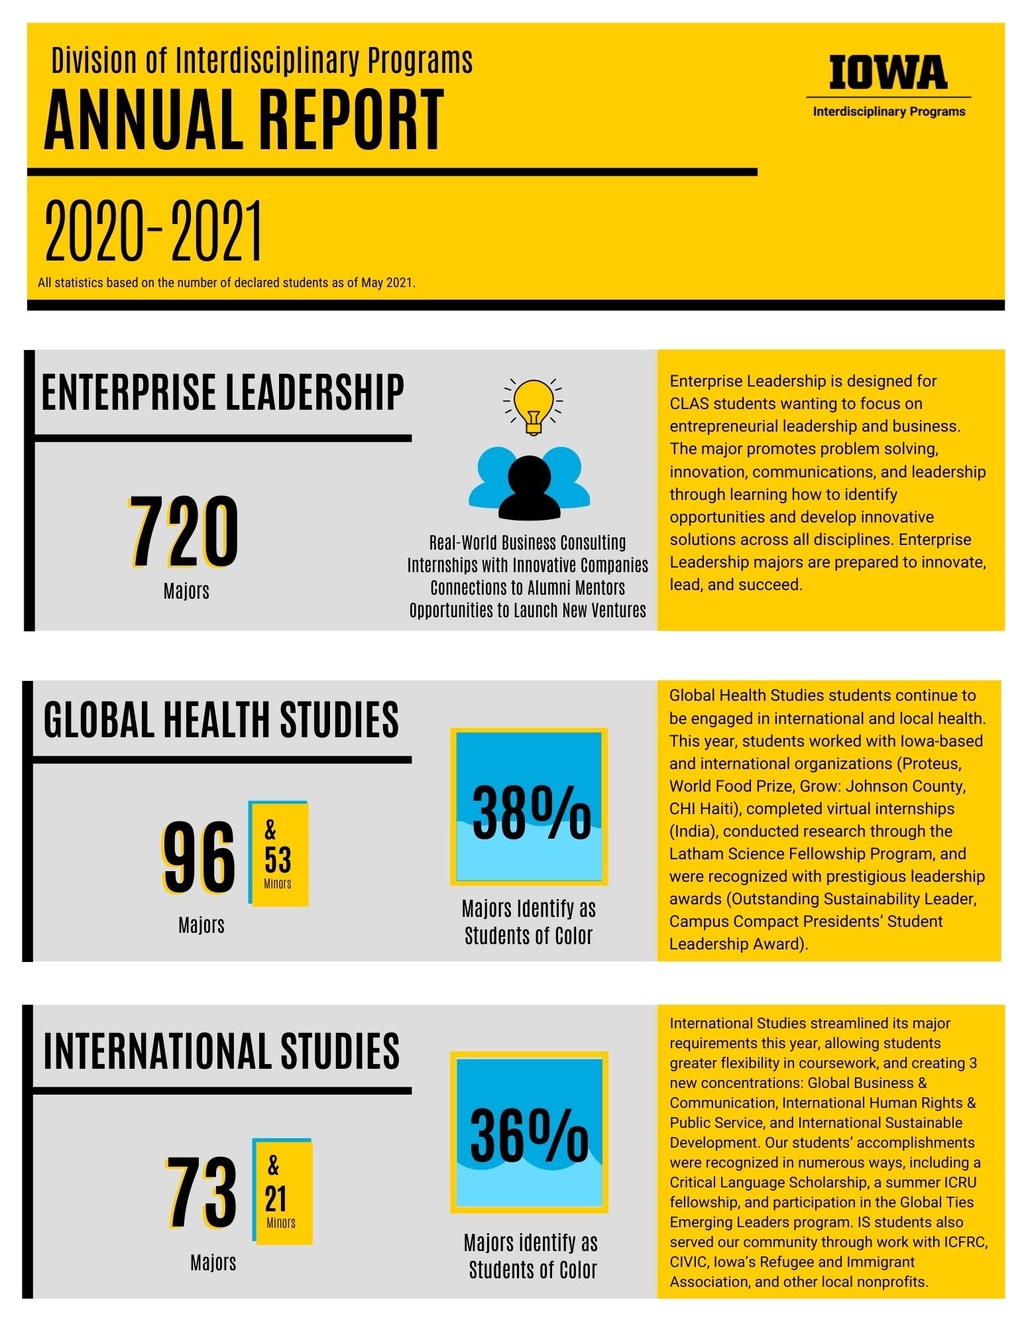 Image with text: "Division of Interdisciplinary Programs Annual Report, 2020-2021"